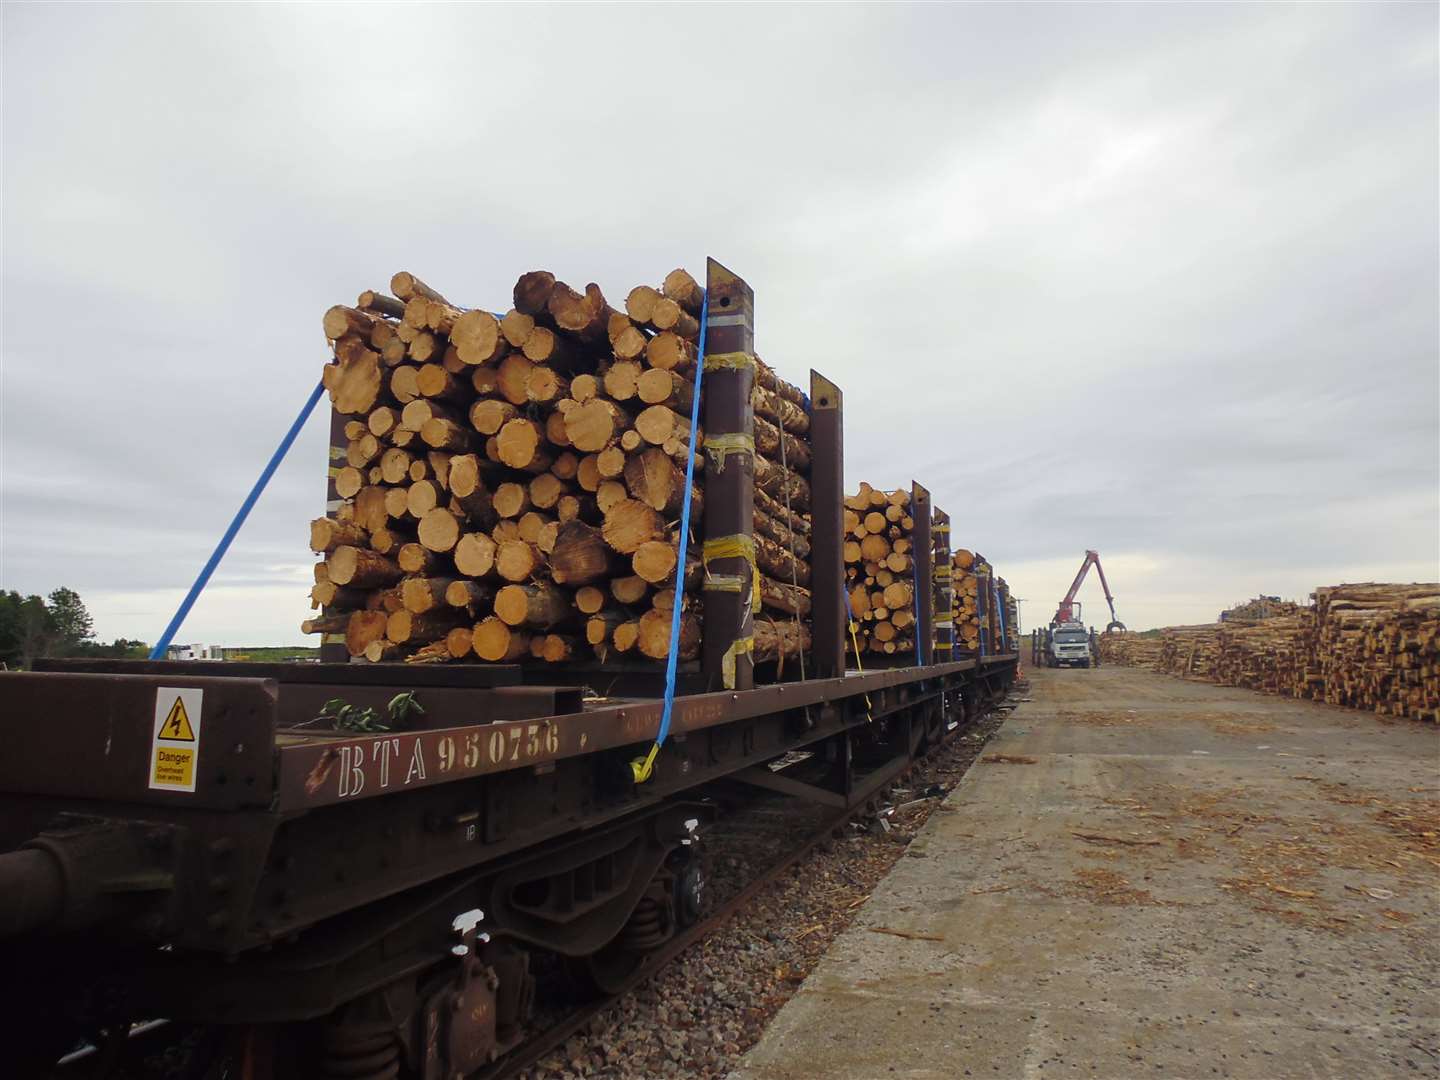 Moving timber loads onto rail will take 250 lorries off the roads over the six-week trial period.